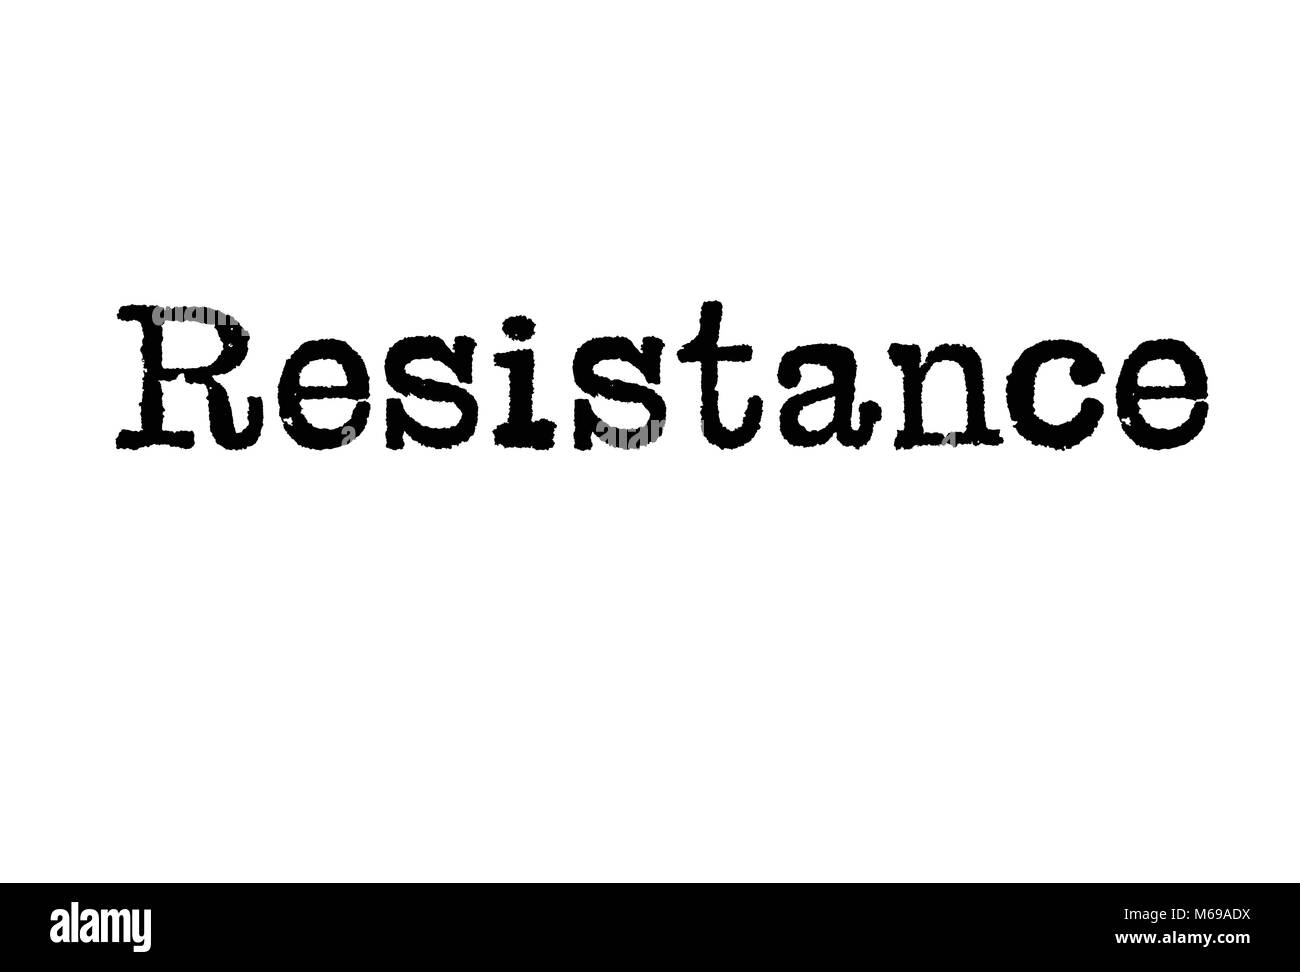 The word Resistance from a typewriter on a white background Stock Photo